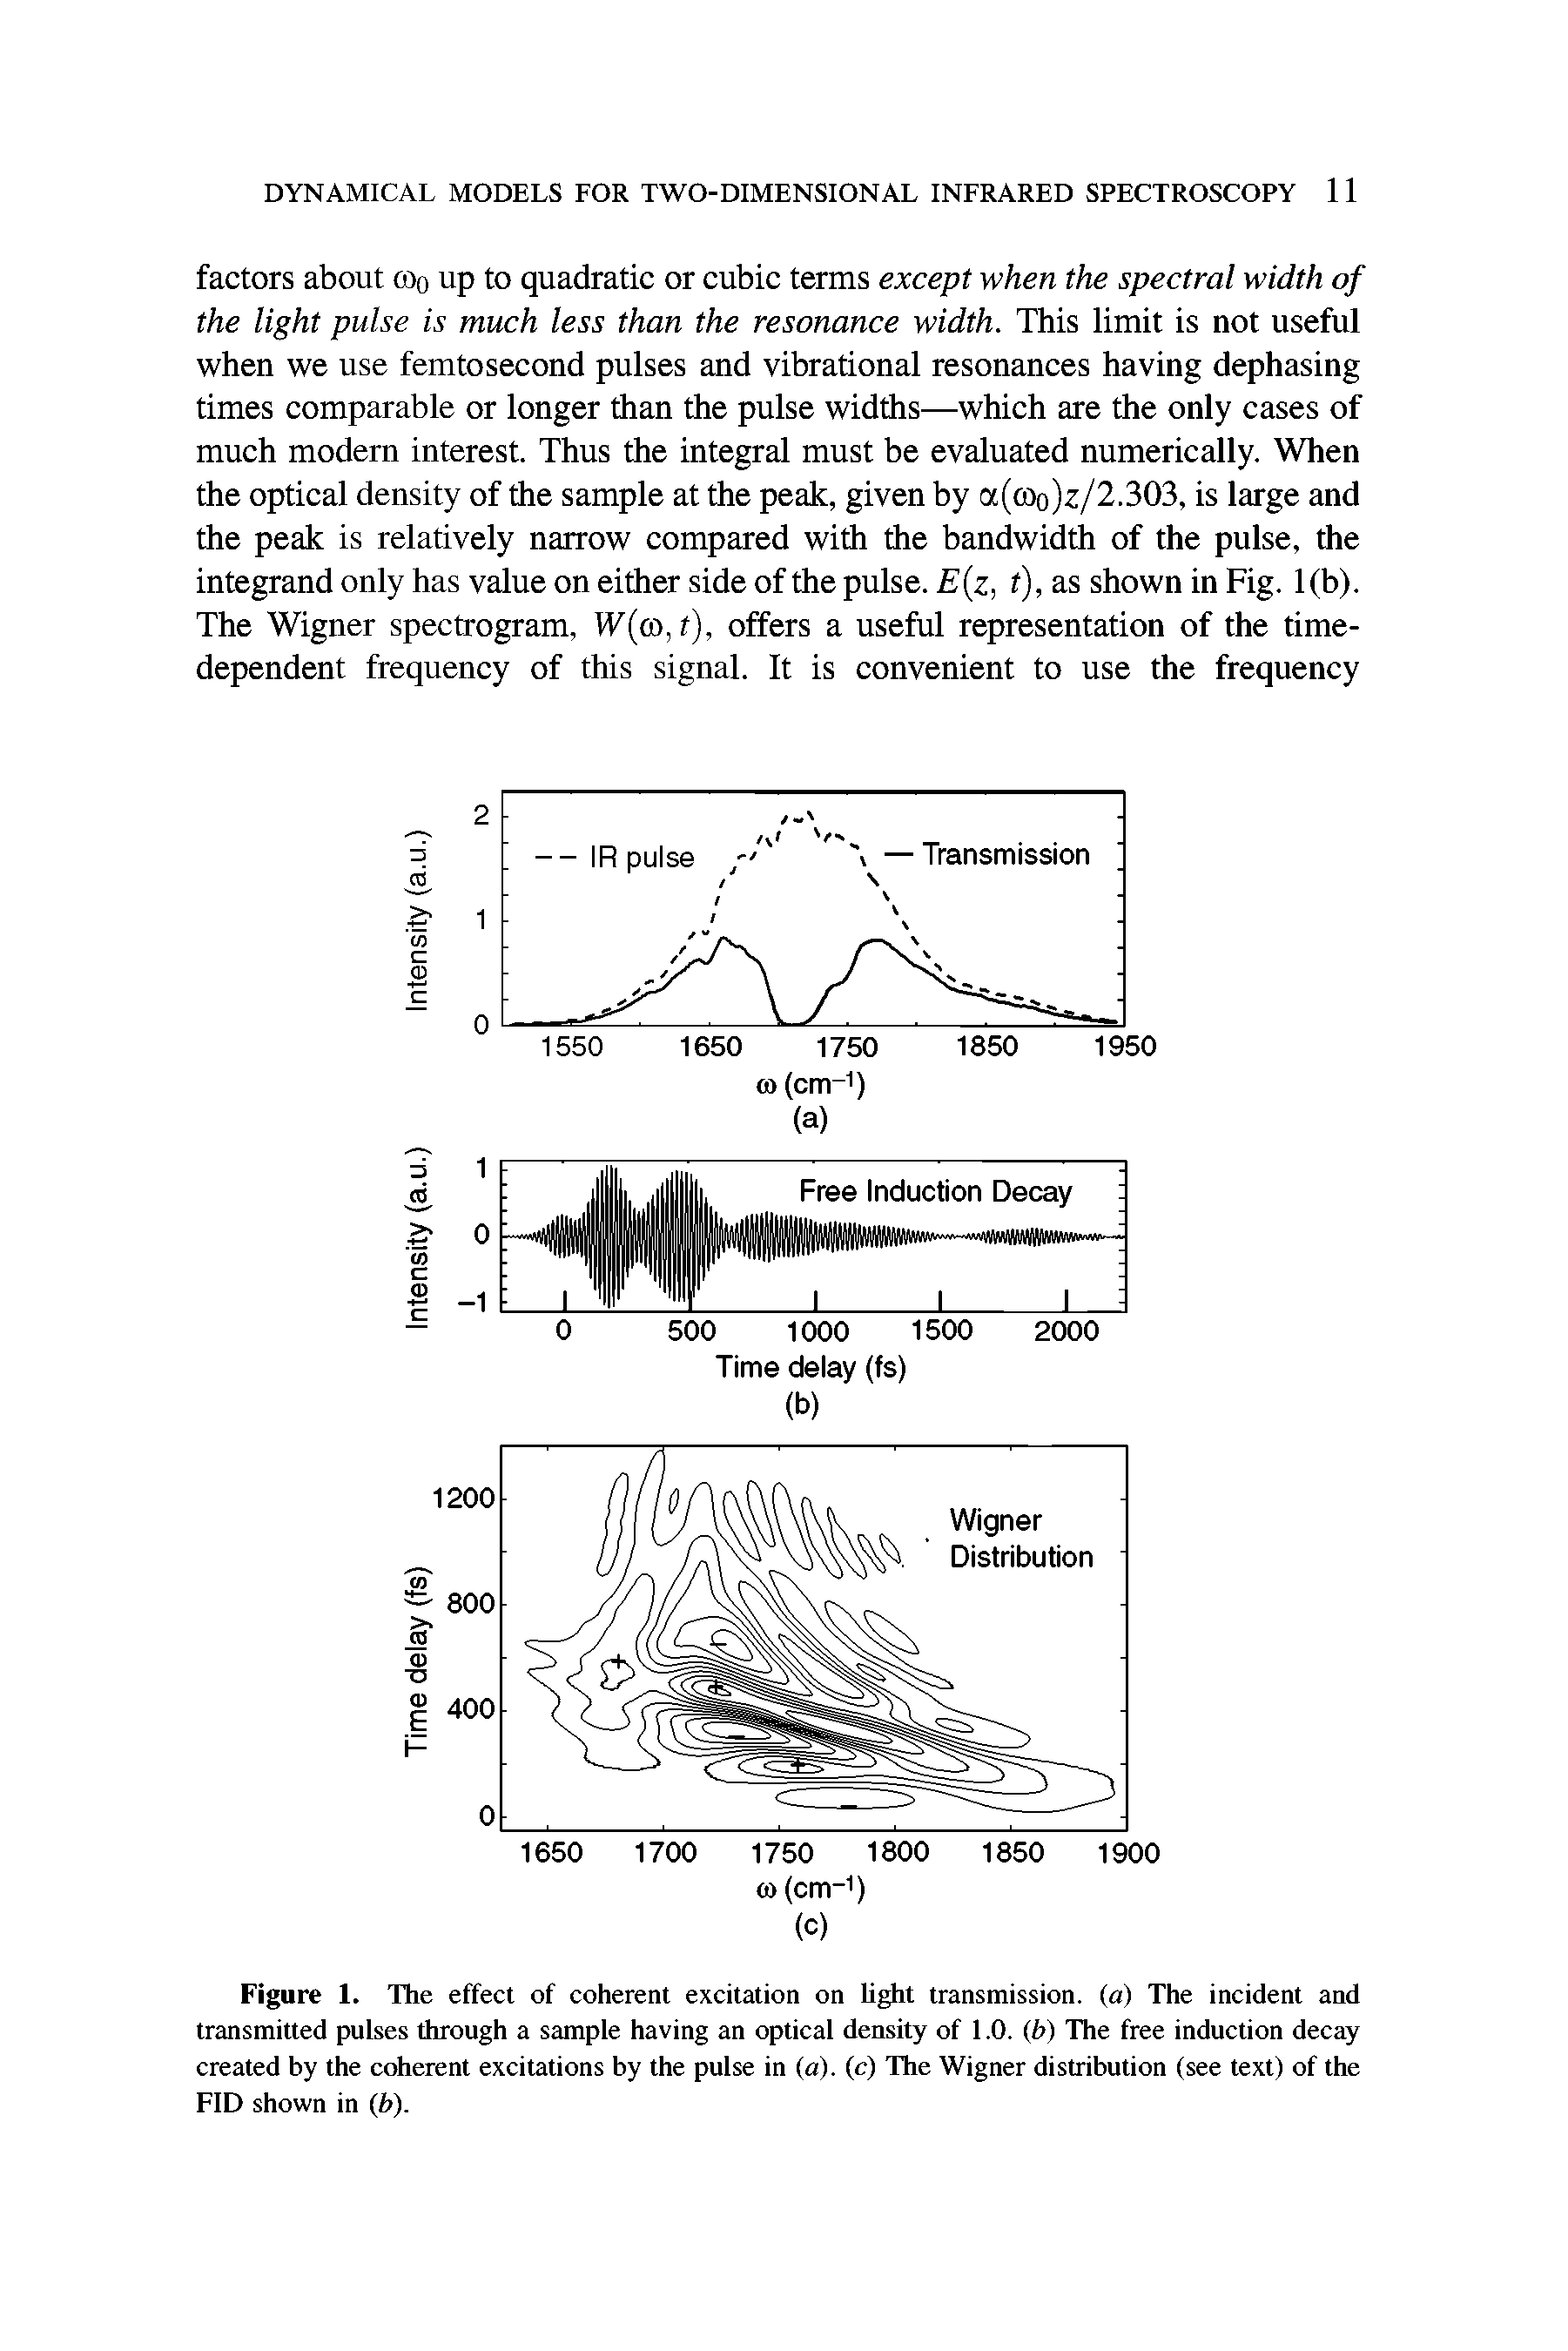 Figure 1. The effect of coherent excitation on hght transmission, (a) The incident and transmitted pulses through a sample having an optical density of 1.0. (b) The free induction decay created by the coherent excitations by the pulse in (a), (c) The Wigner distribution (see text) of the FID shown in (h).